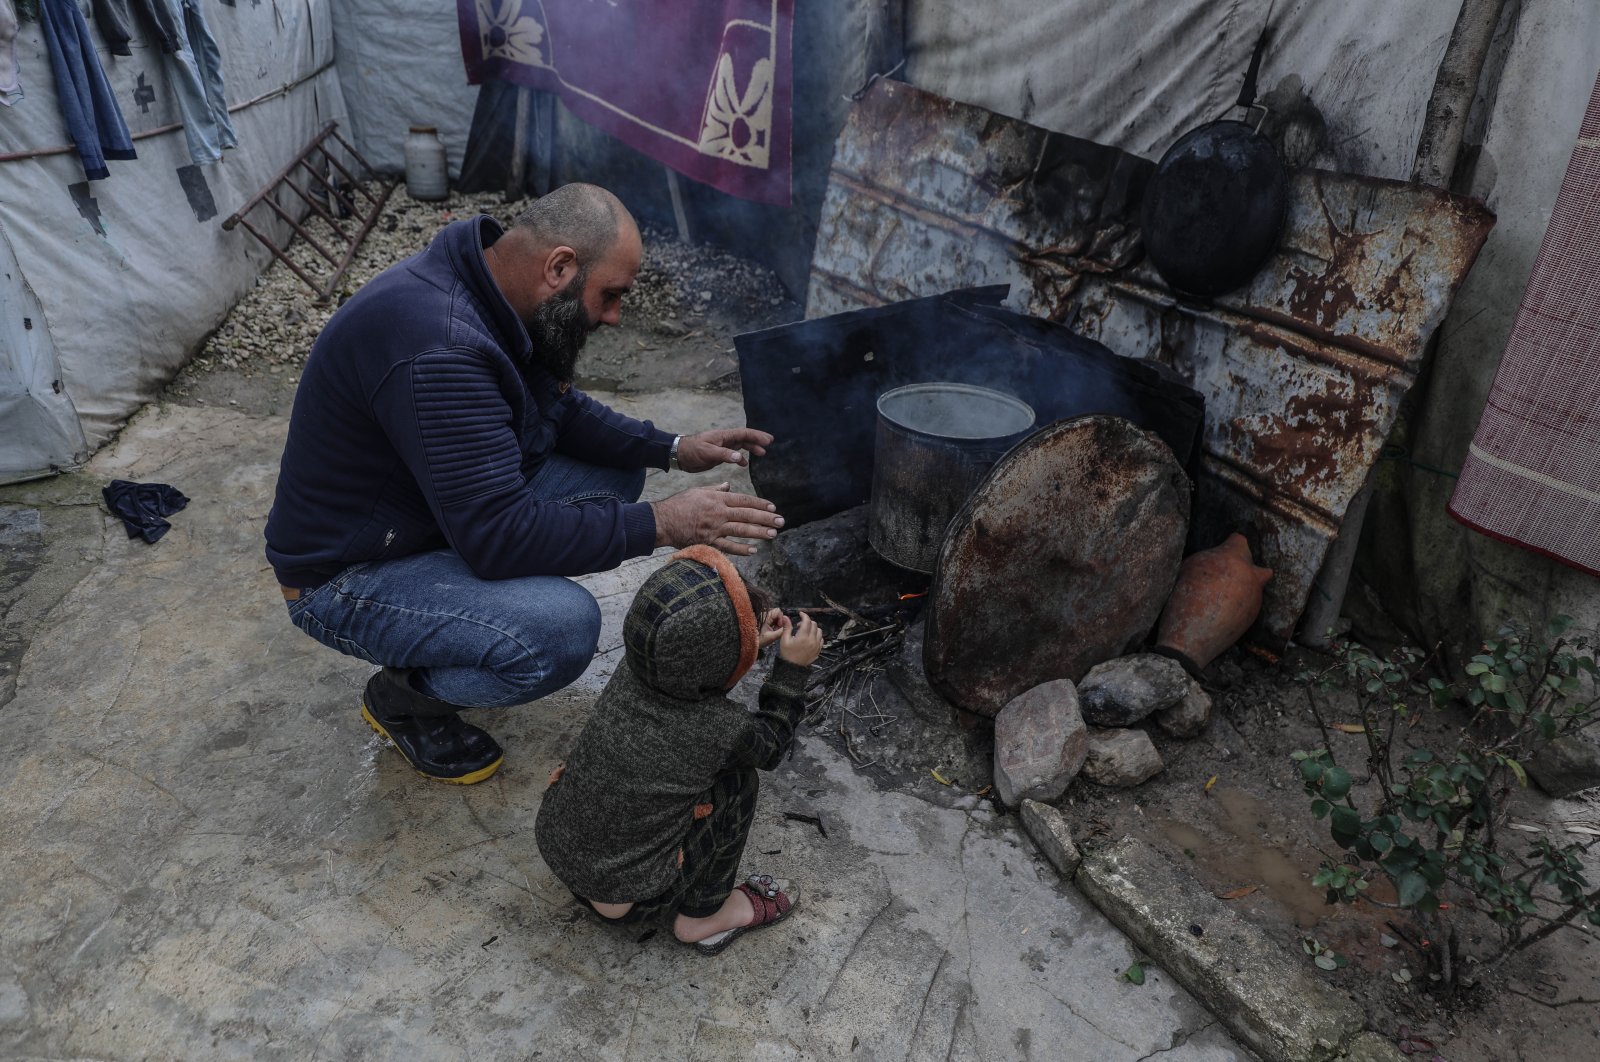 A family is seen trying to stay warm during winter in Idlib province&#039;s Ataa camp for displaced Syrians, Syria, Dec. 25, 2022 (AA Photo)